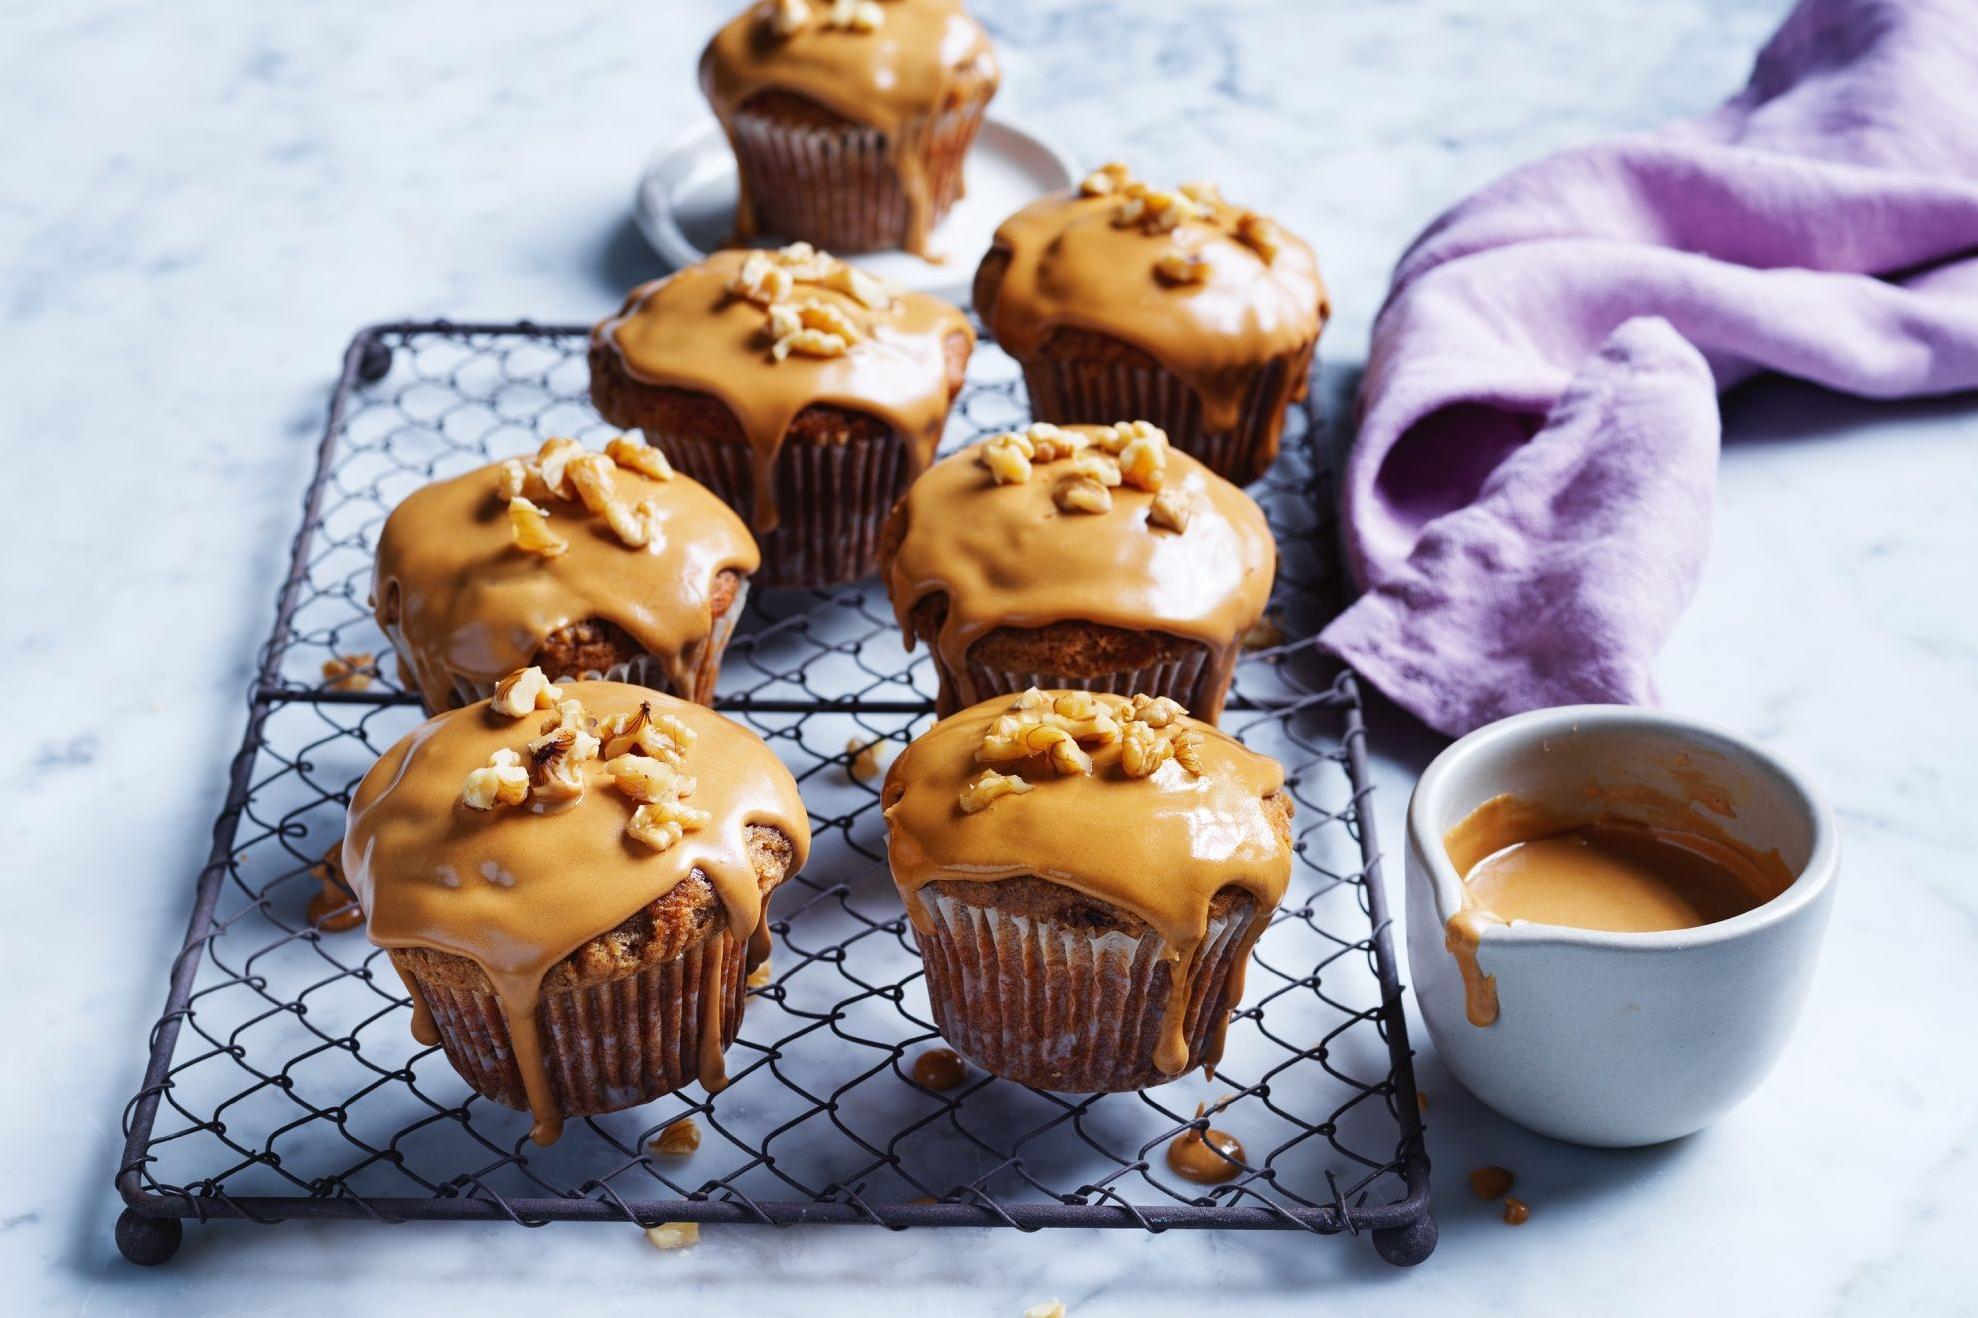  Excite your taste buds with these muffins, made fresh with love.